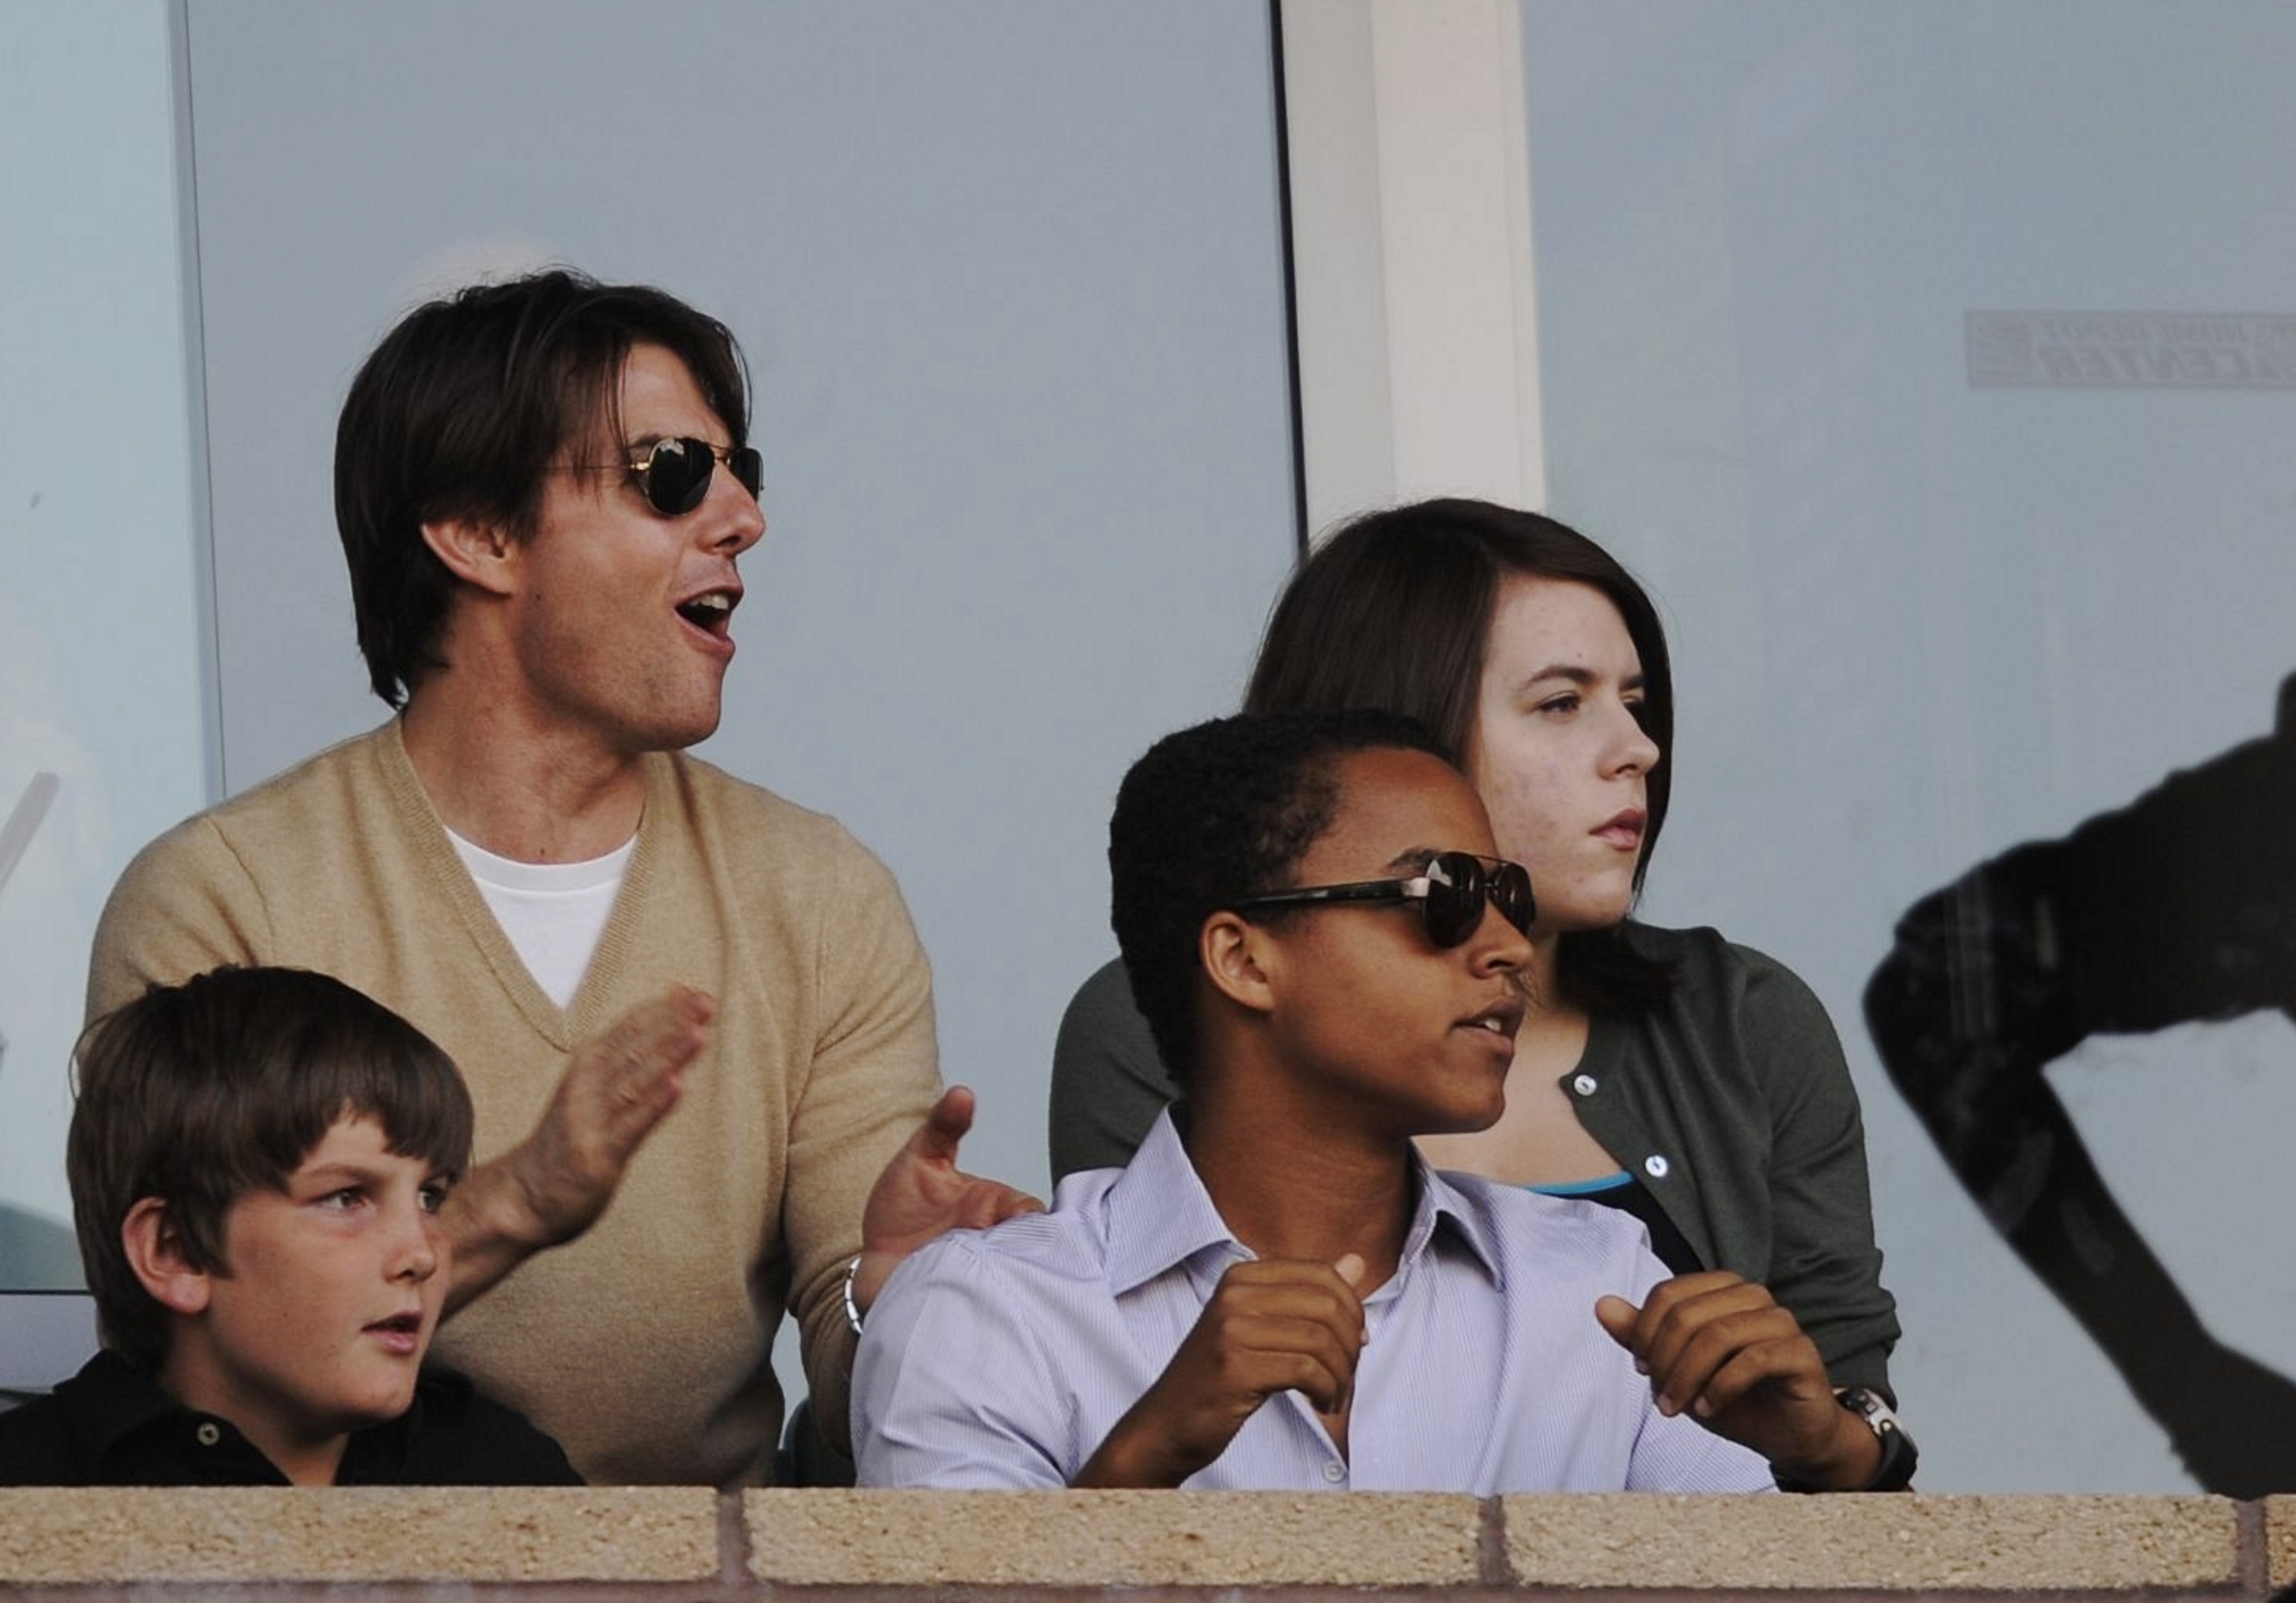 Tom Cruise, Connor Kidman Cruise, and Isabella Kidman Cruise during the MLS game on July 19, 2009, in Carson, California | Source: Getty Images